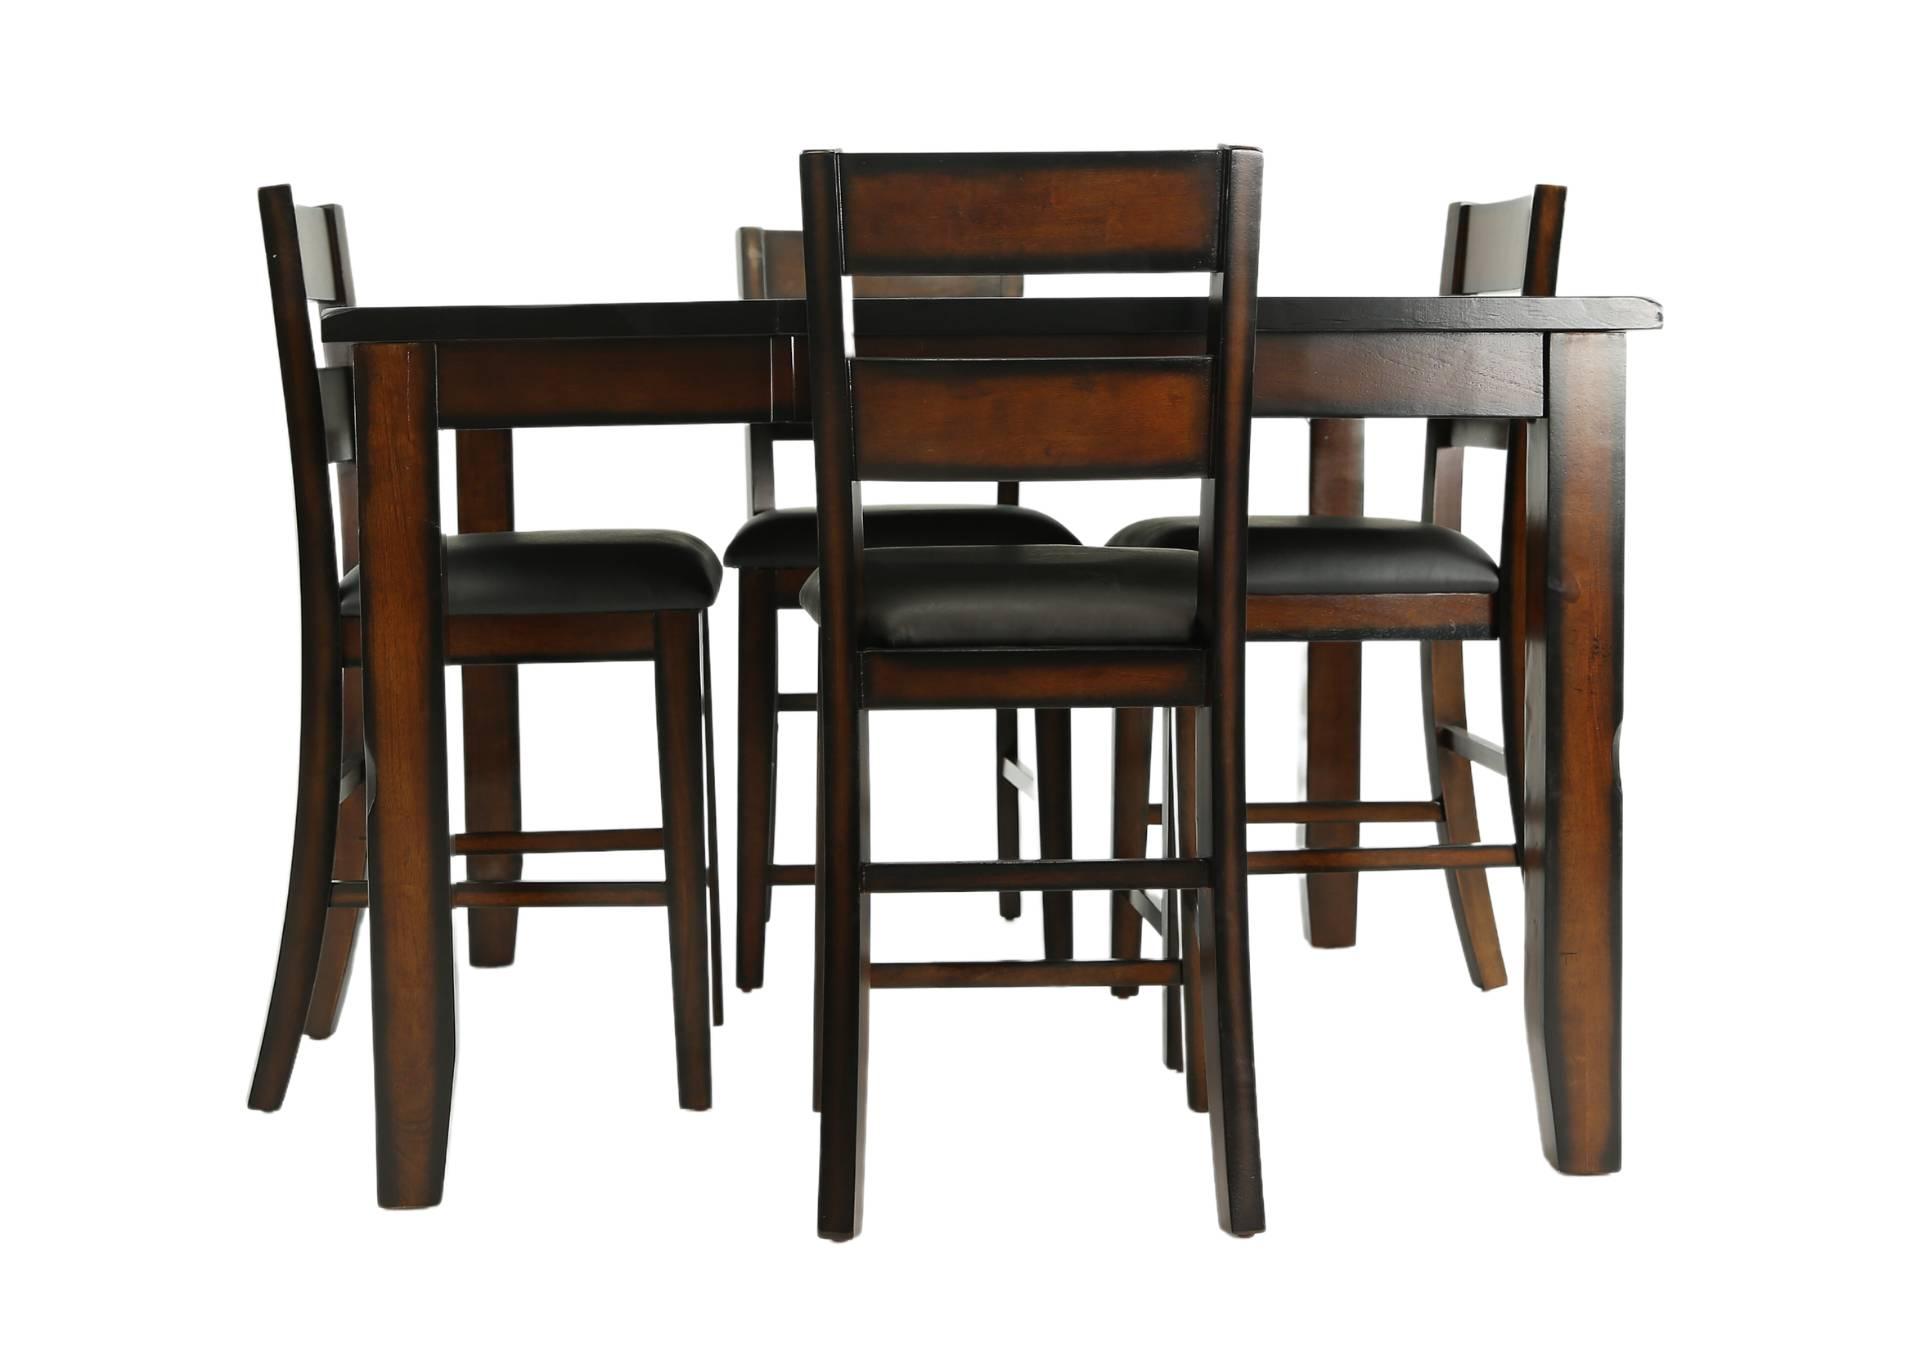 MALDIVES 5 PIECE COUNTER HEIGHT DINING SET,CROWN MARK INT.